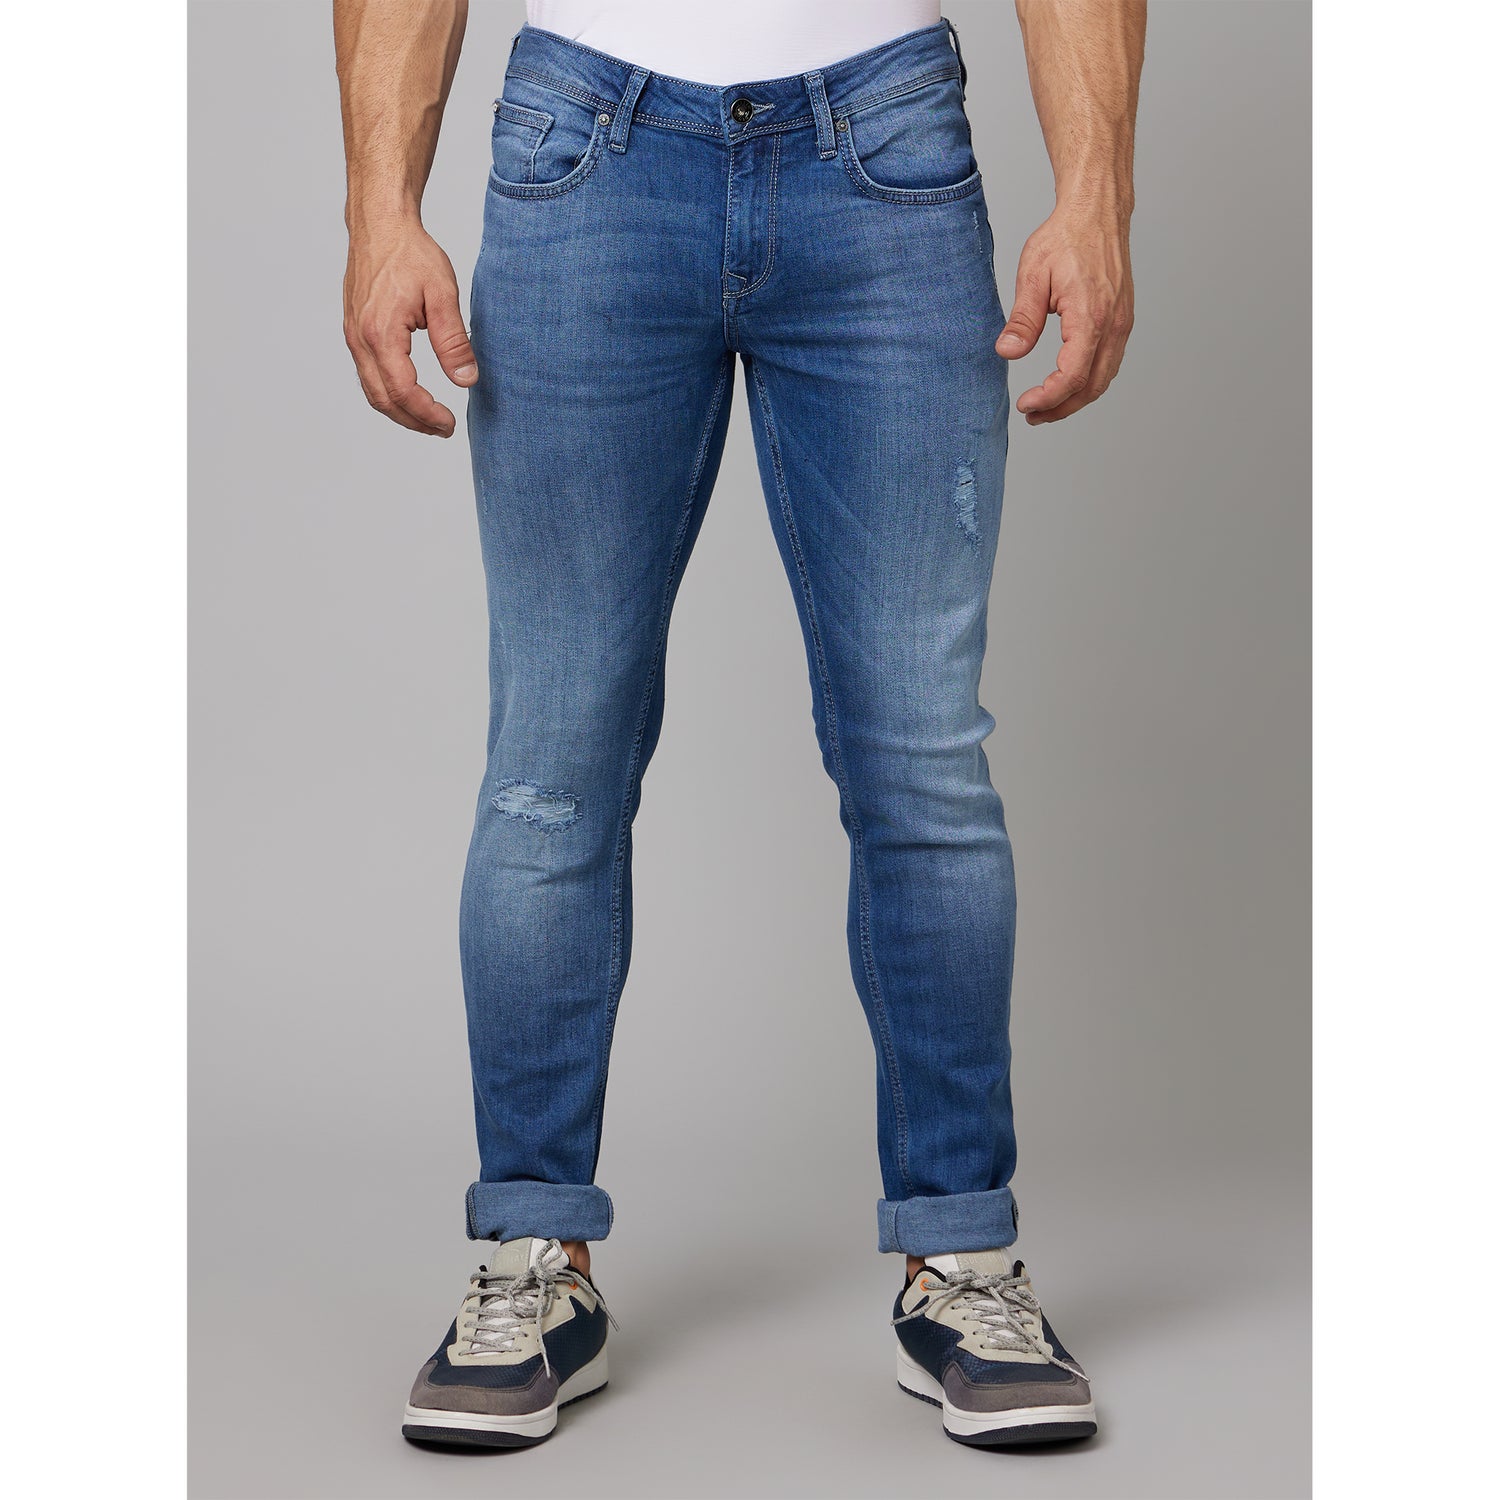 Blue Skinny Fit Low Distress Light Fade Stretchable Jeans (COECOMS45)